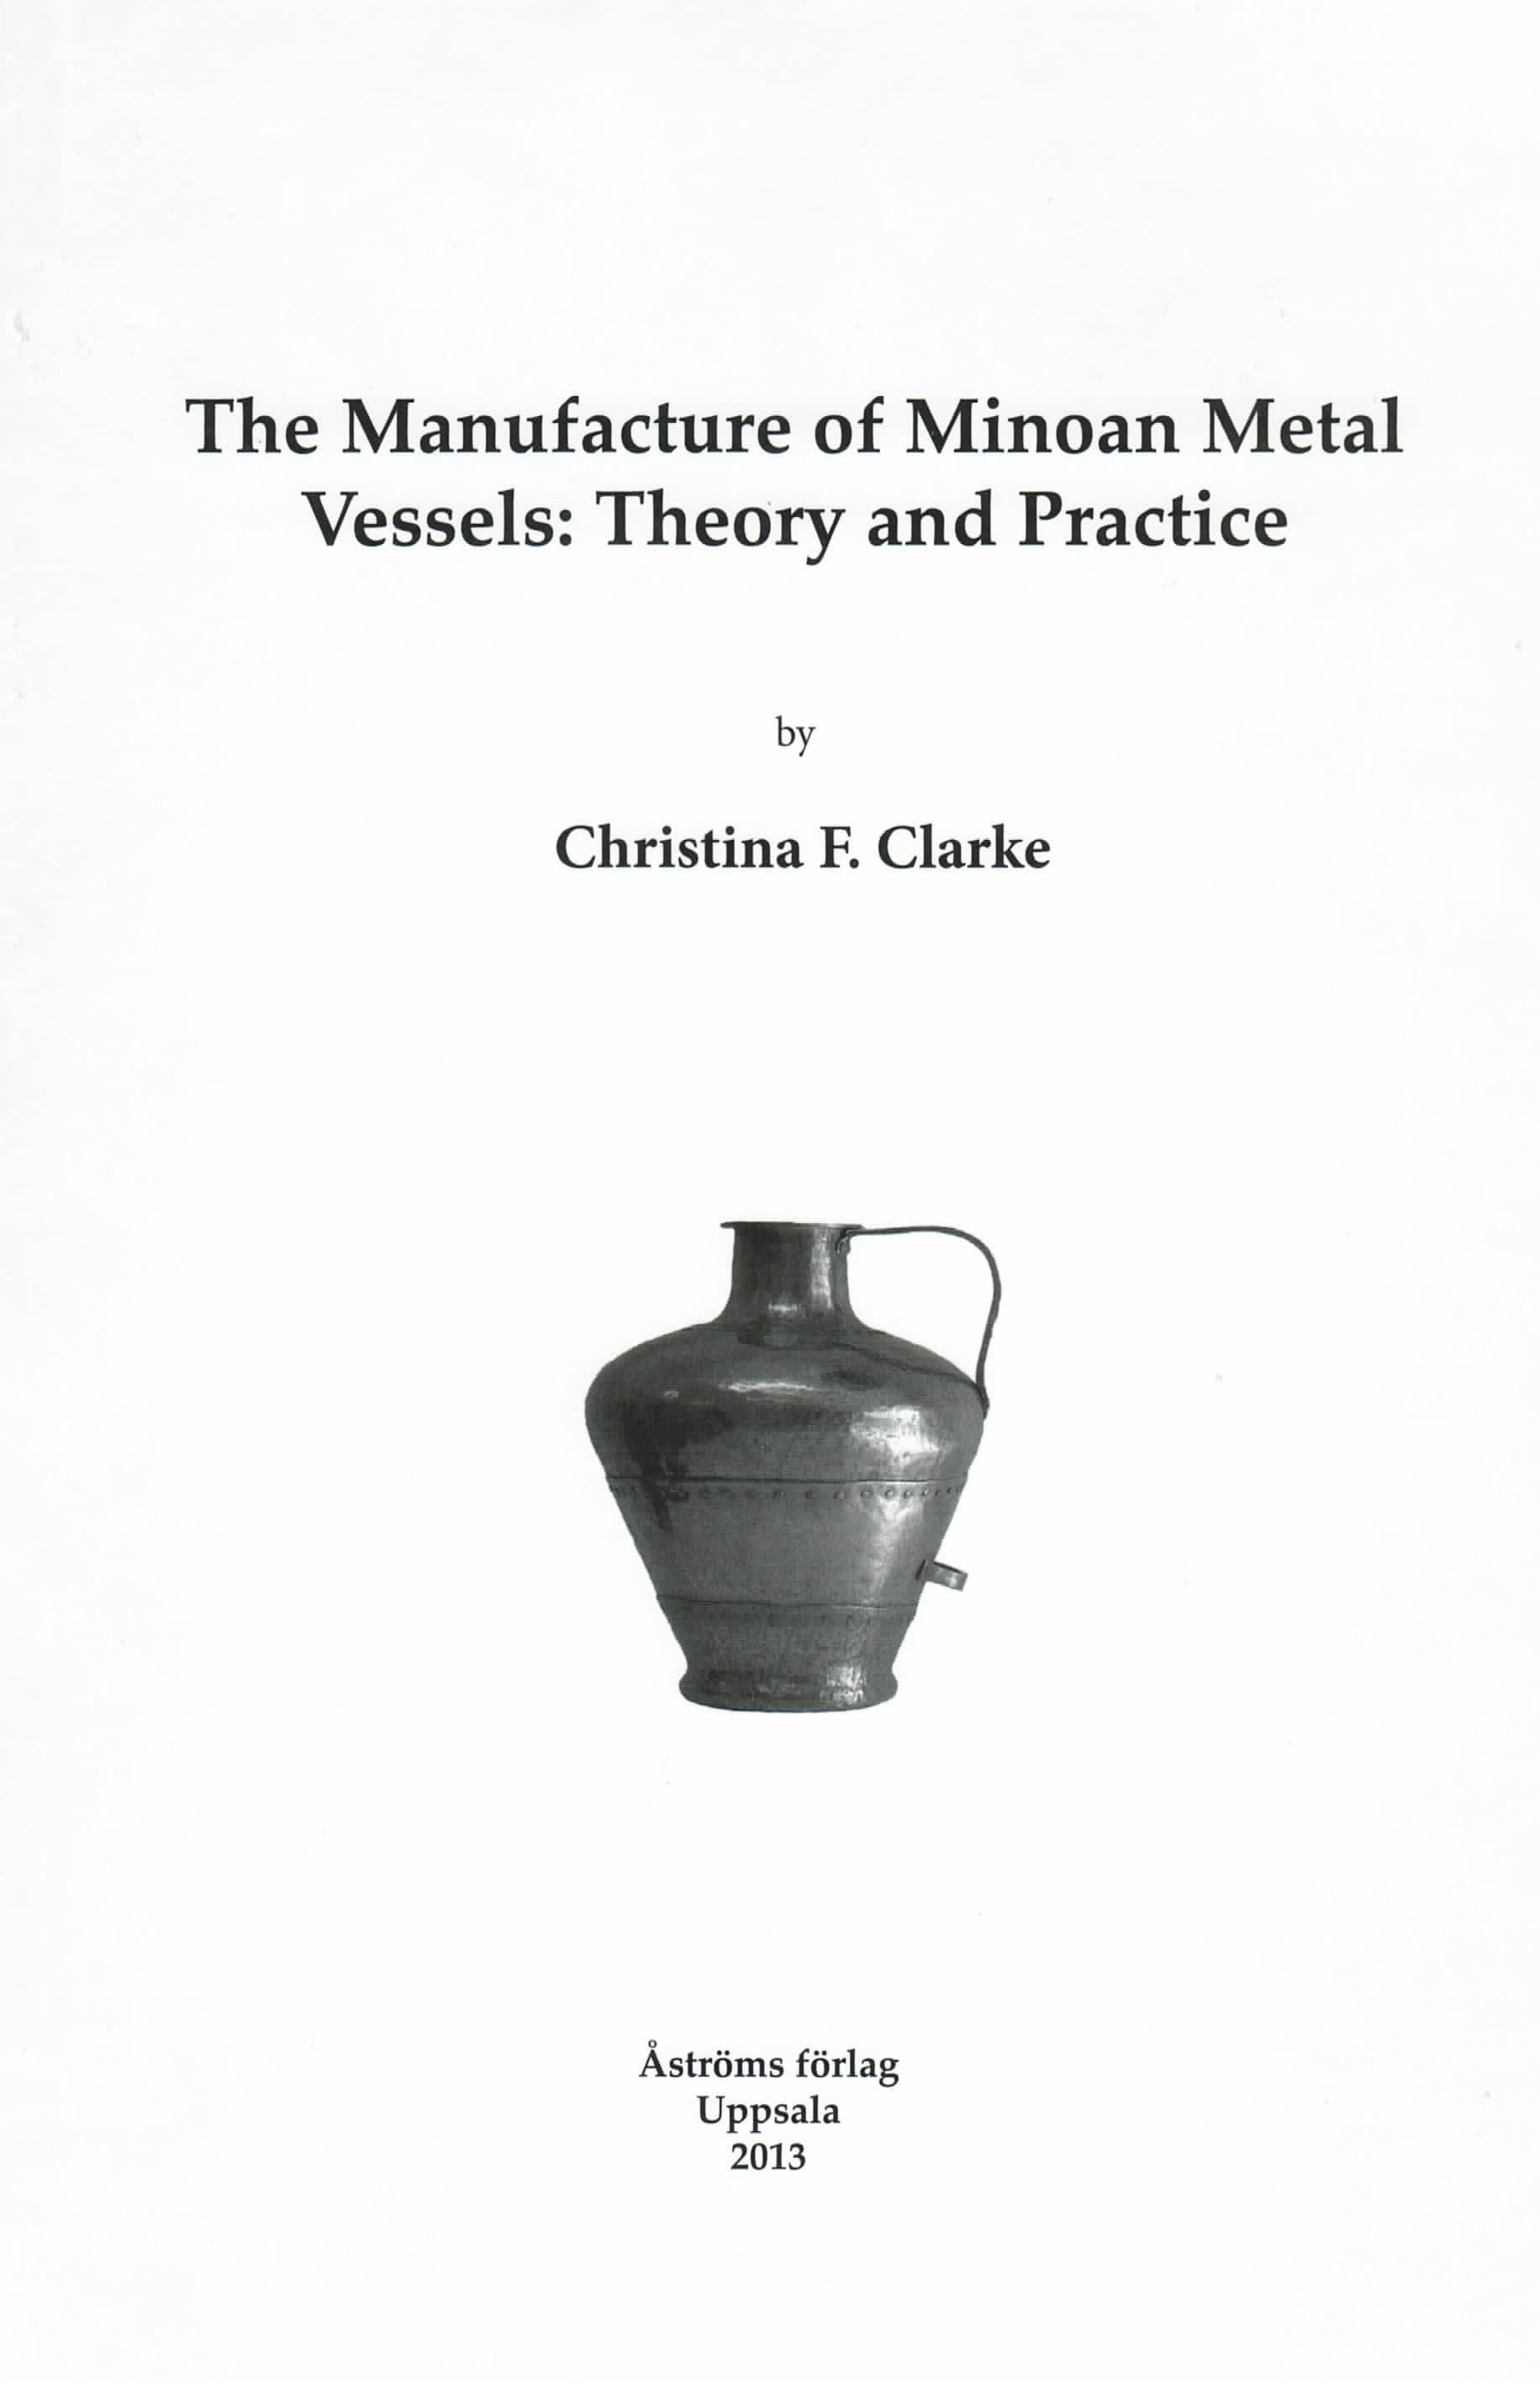 [The Manufacture of Minoan Metal Vessels. Theory and Practice.]